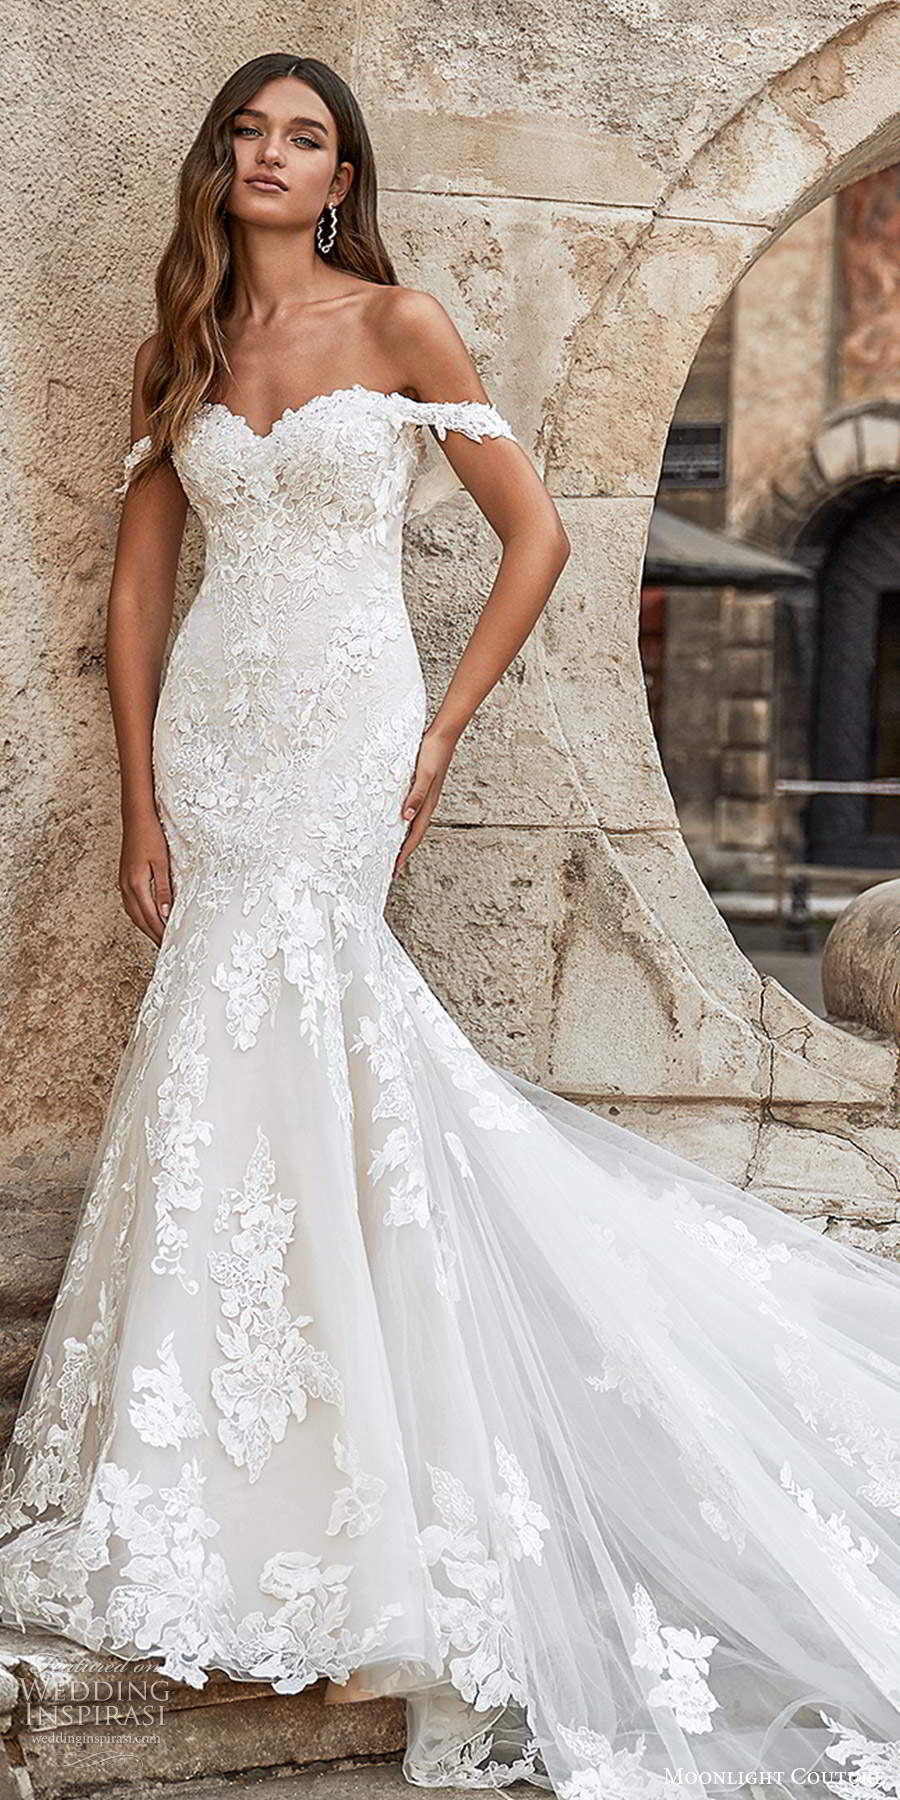 moonlight couture spring 2021 bridal off shoulder straps sweetheart neckline fully emebellished lace fit flare mermaid wedding dress cathedral train (6) lv